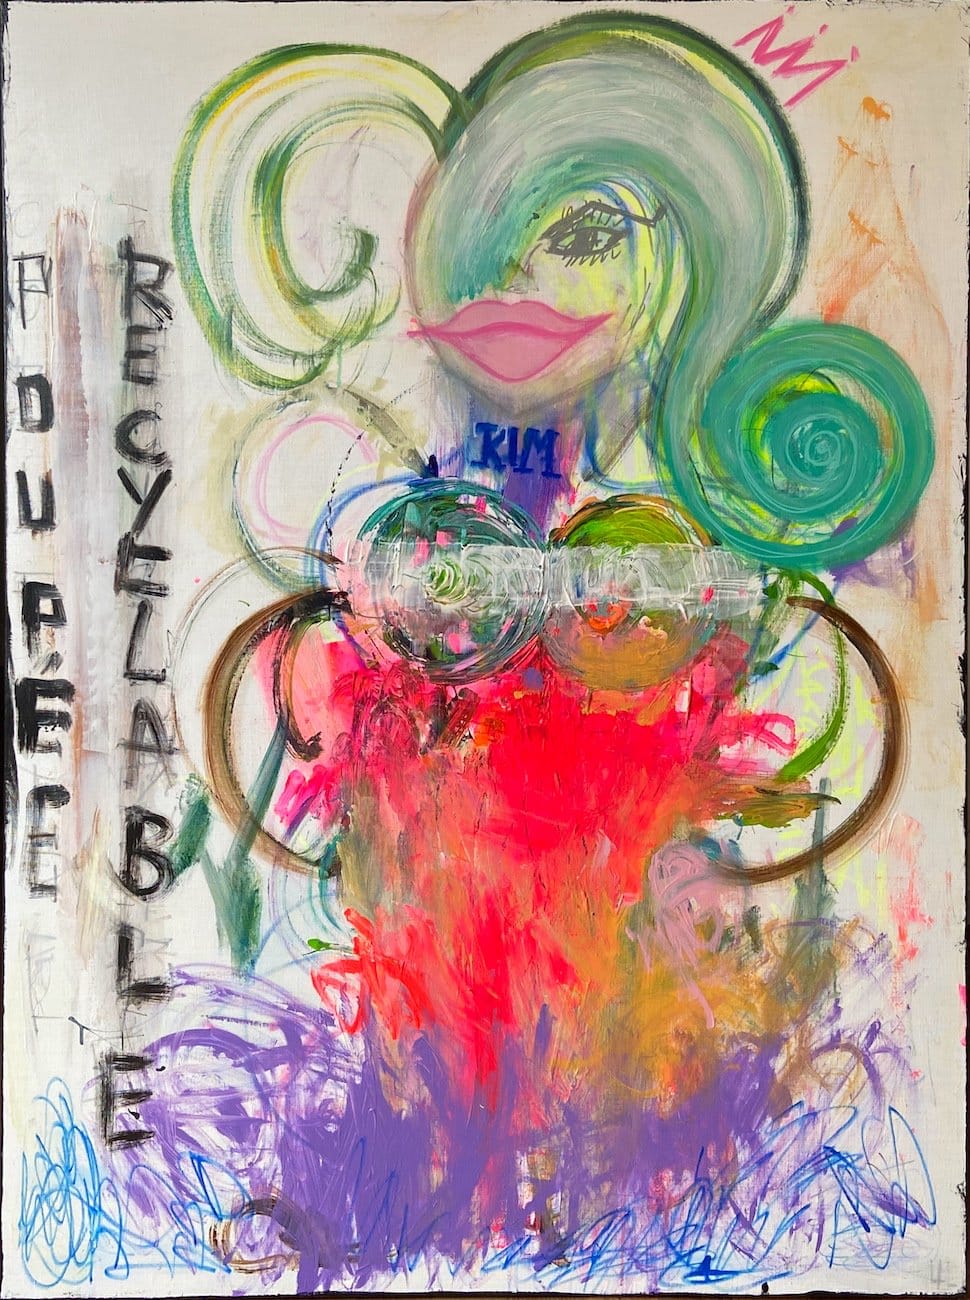 Recyclable doll - acrylic painting on canvas - 97 cm x 130 cm - Marzena Lavrilleux - artist painter in Orleans - France